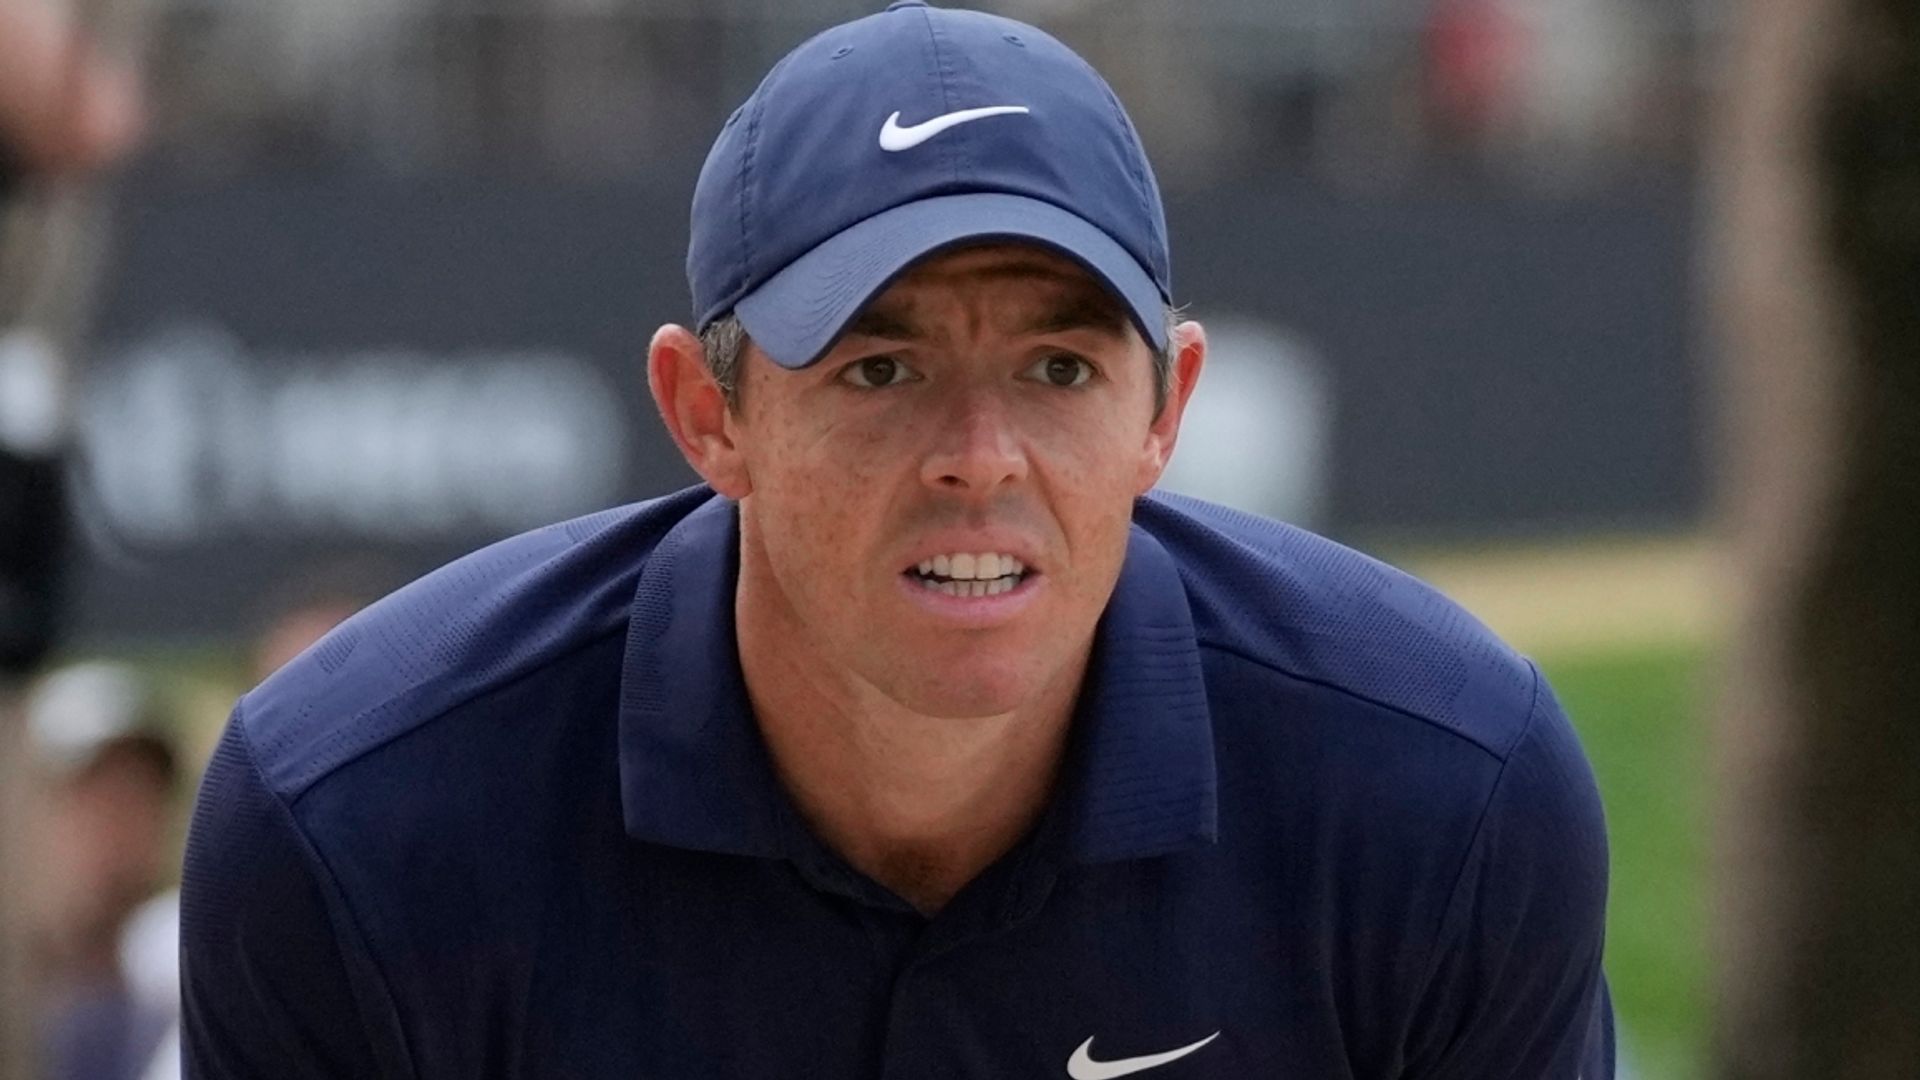 McIlroy stays in contention and avoids Reed pairing in Dubai